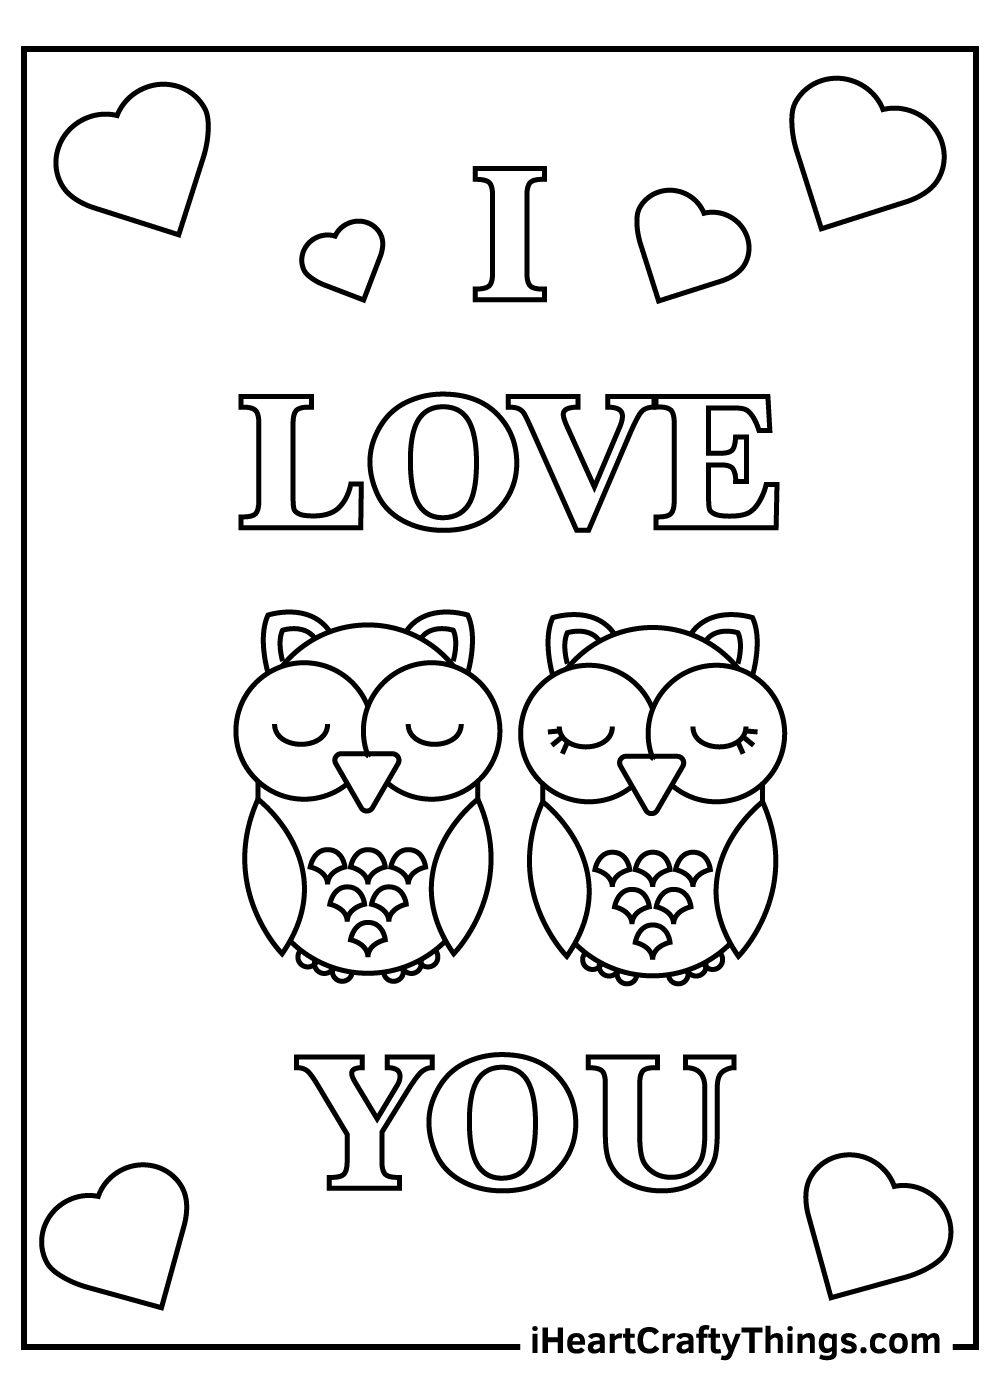 I Love You Coloring Pages Updated 20